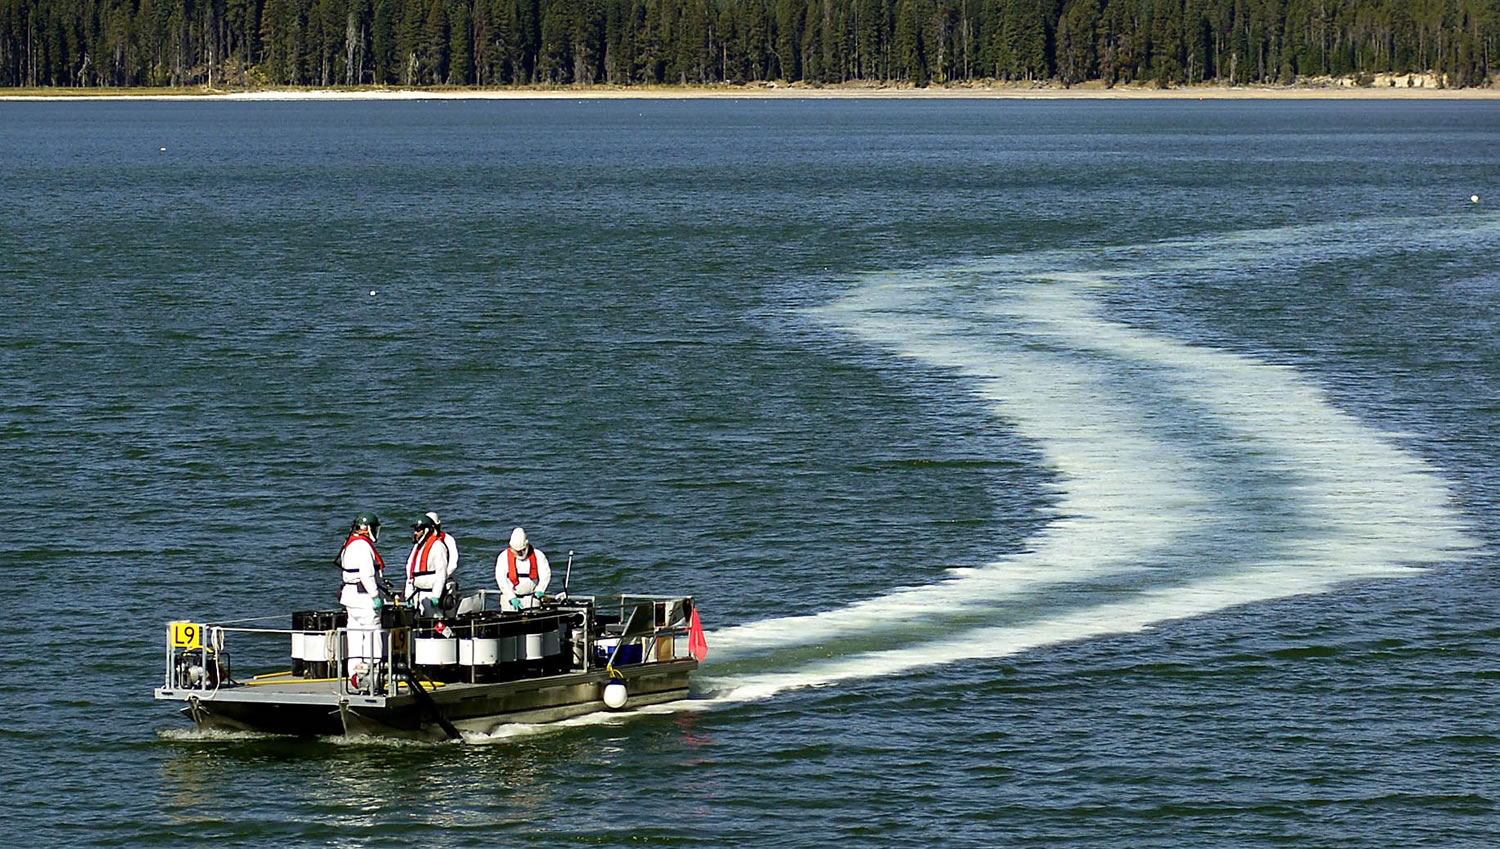 Oregon Department of Fish and Wildlife employees leave a trail of the pesticide rotenone, used to kill tui chub fish, in Diamond Lake, Ore., on Sept. 14, 2006.